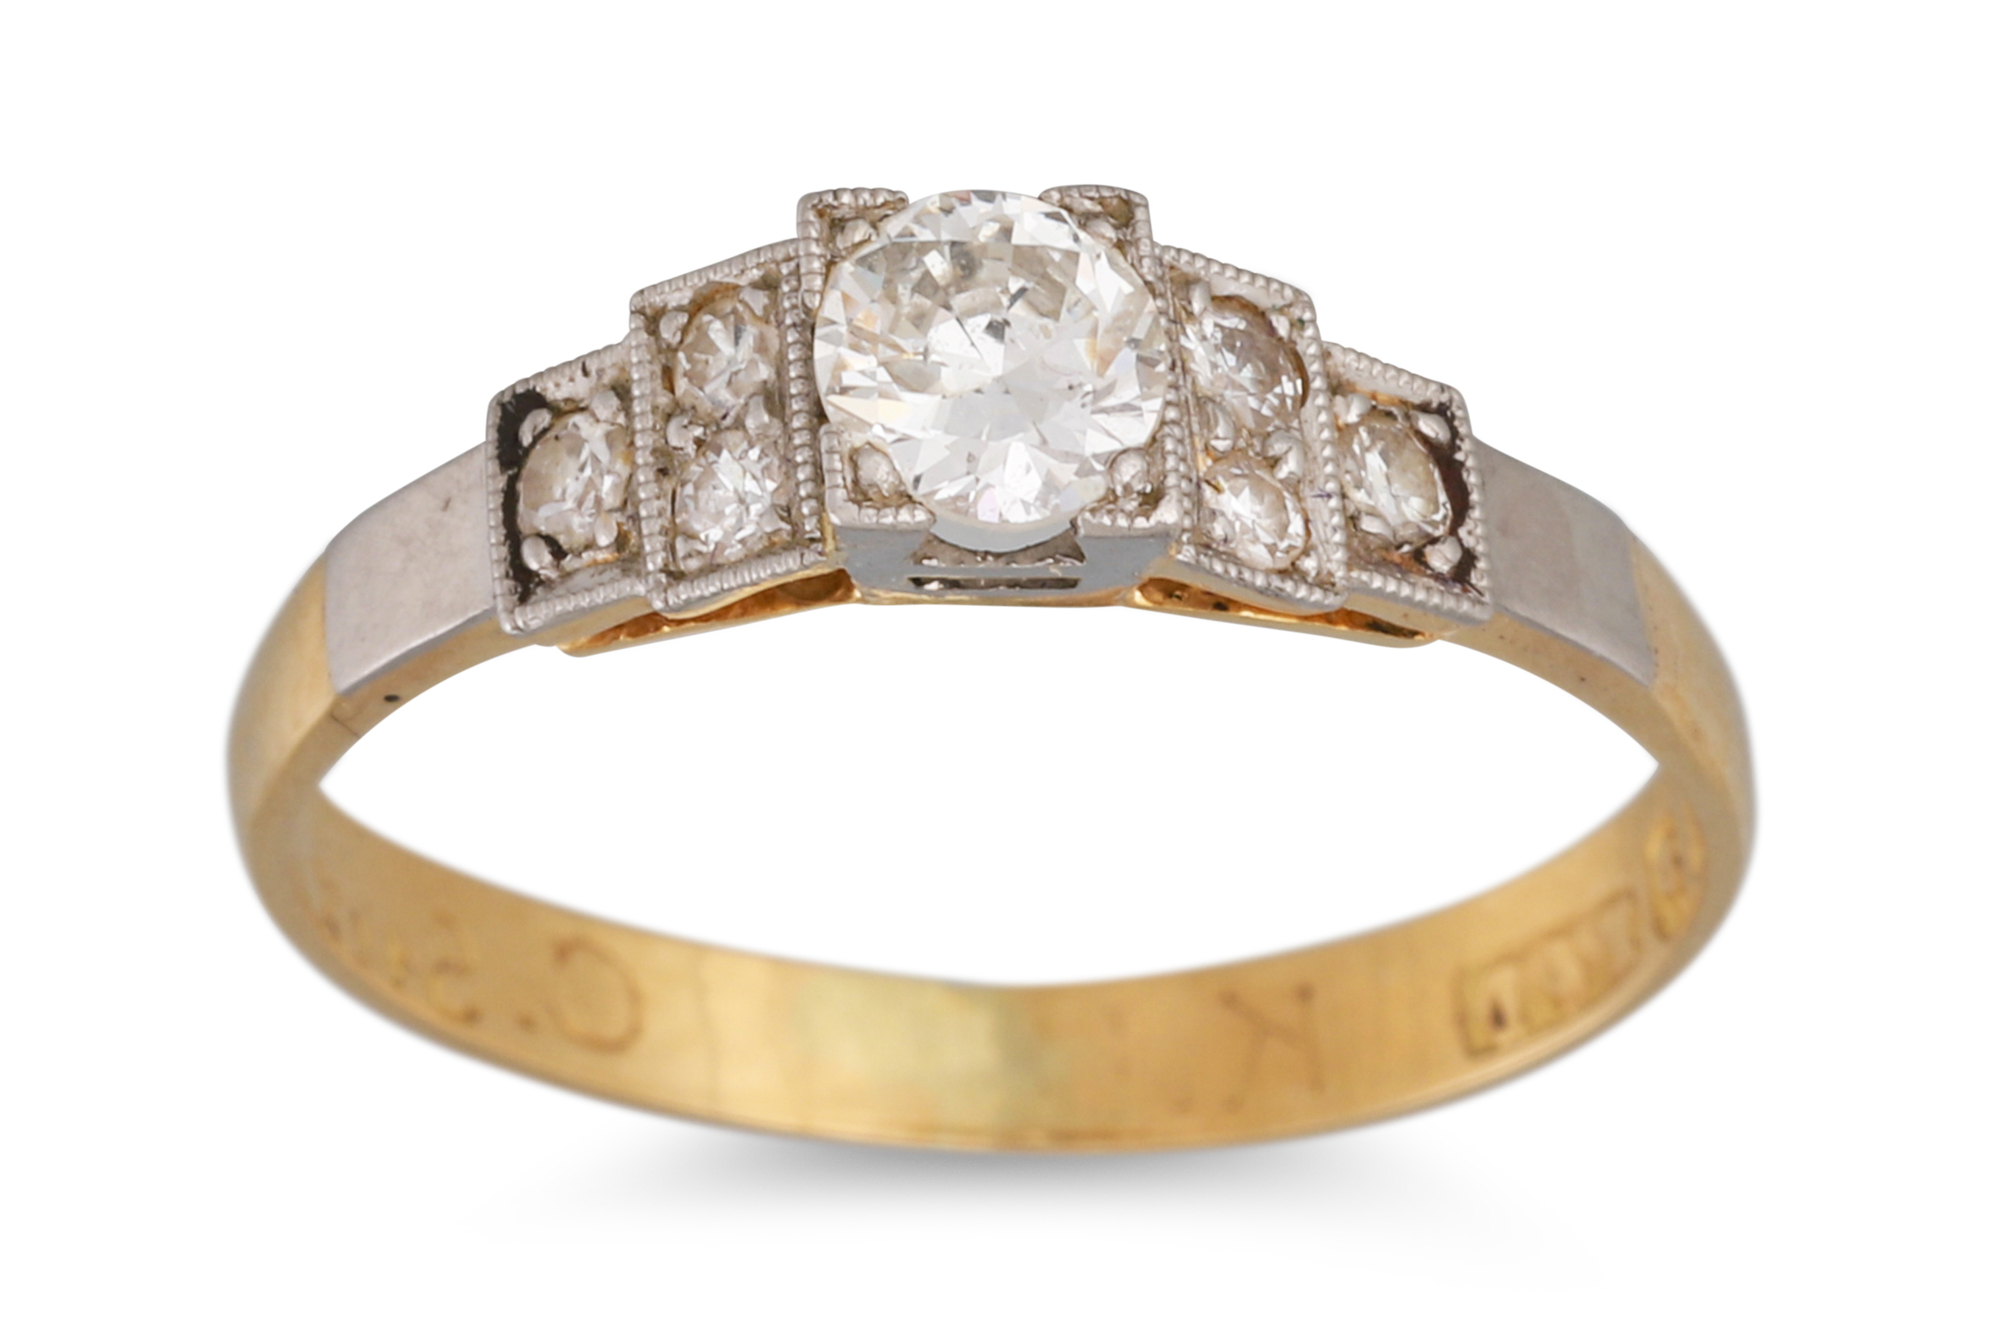 A LATE ART DECO DIAMOND RING, the old cut diamond to stepped diamond shoulders, dated 1938,